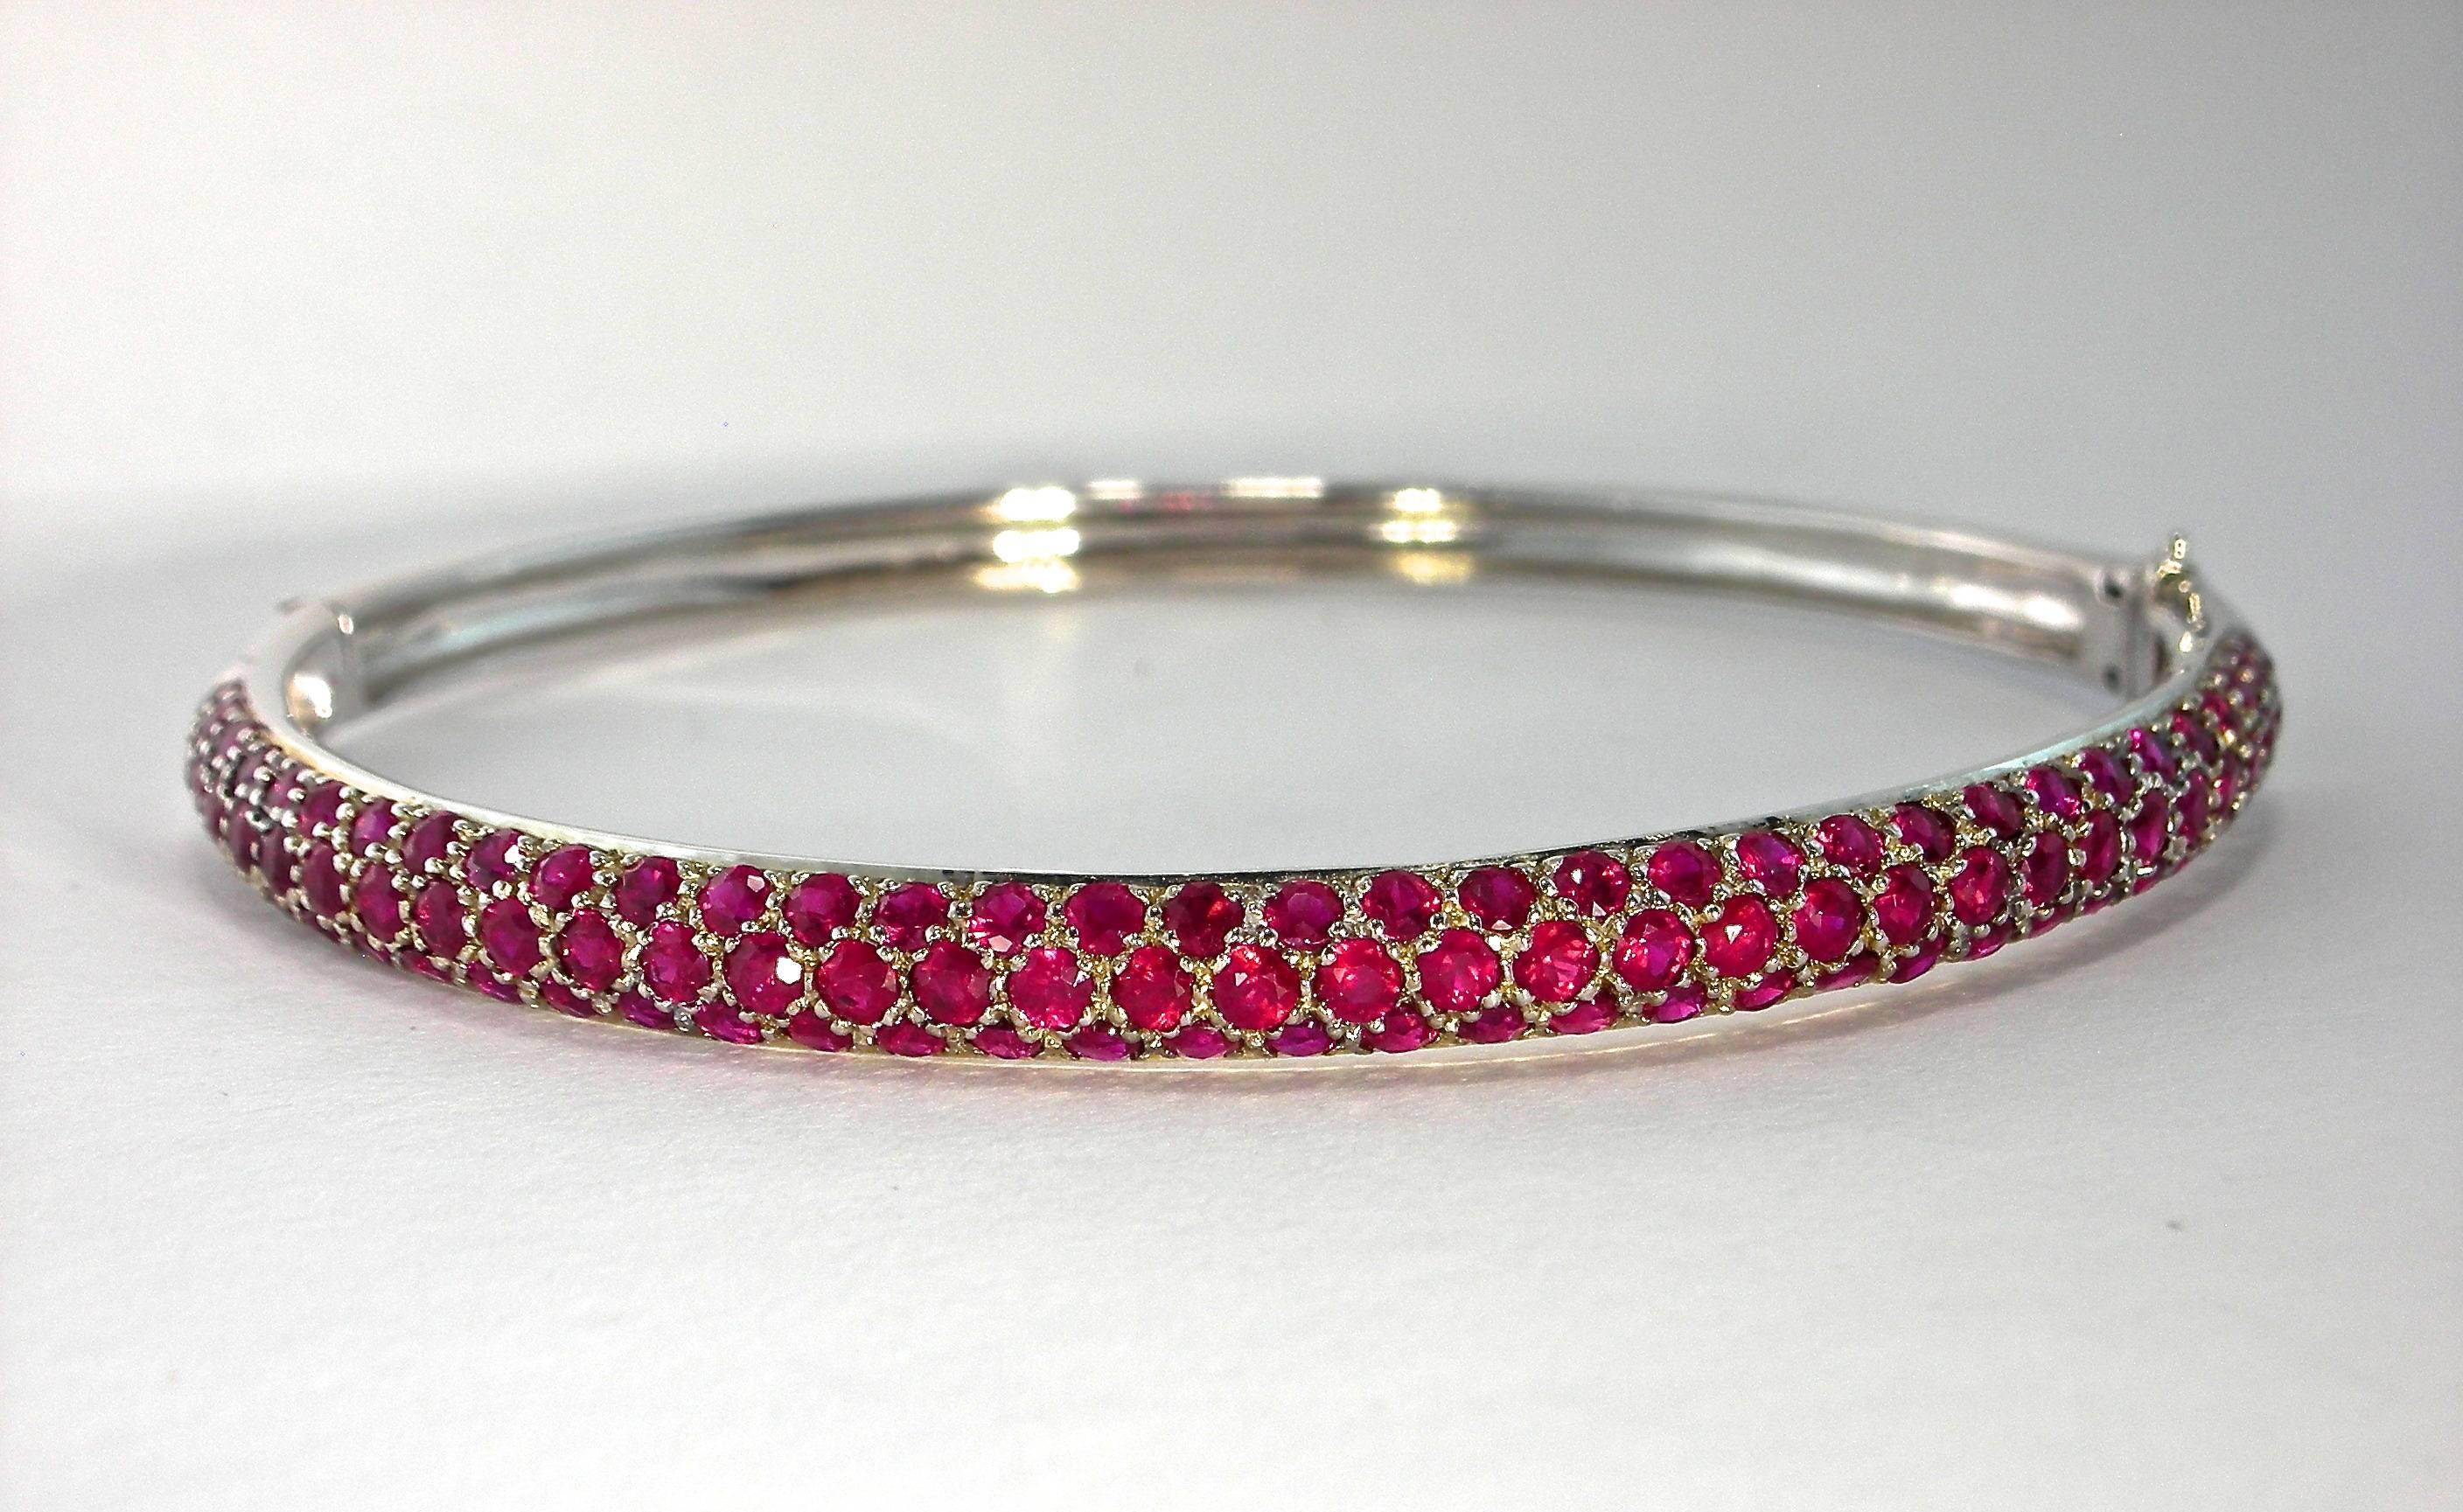 Jona design collection, hand crafted in Italy, 18 karat white gold bangle bracelet. The ruby pavé is set with 103 burmese rubies for a total weight of 4.83 carats.

All Jona  jewelry is new and has never been previously owned or worn.

